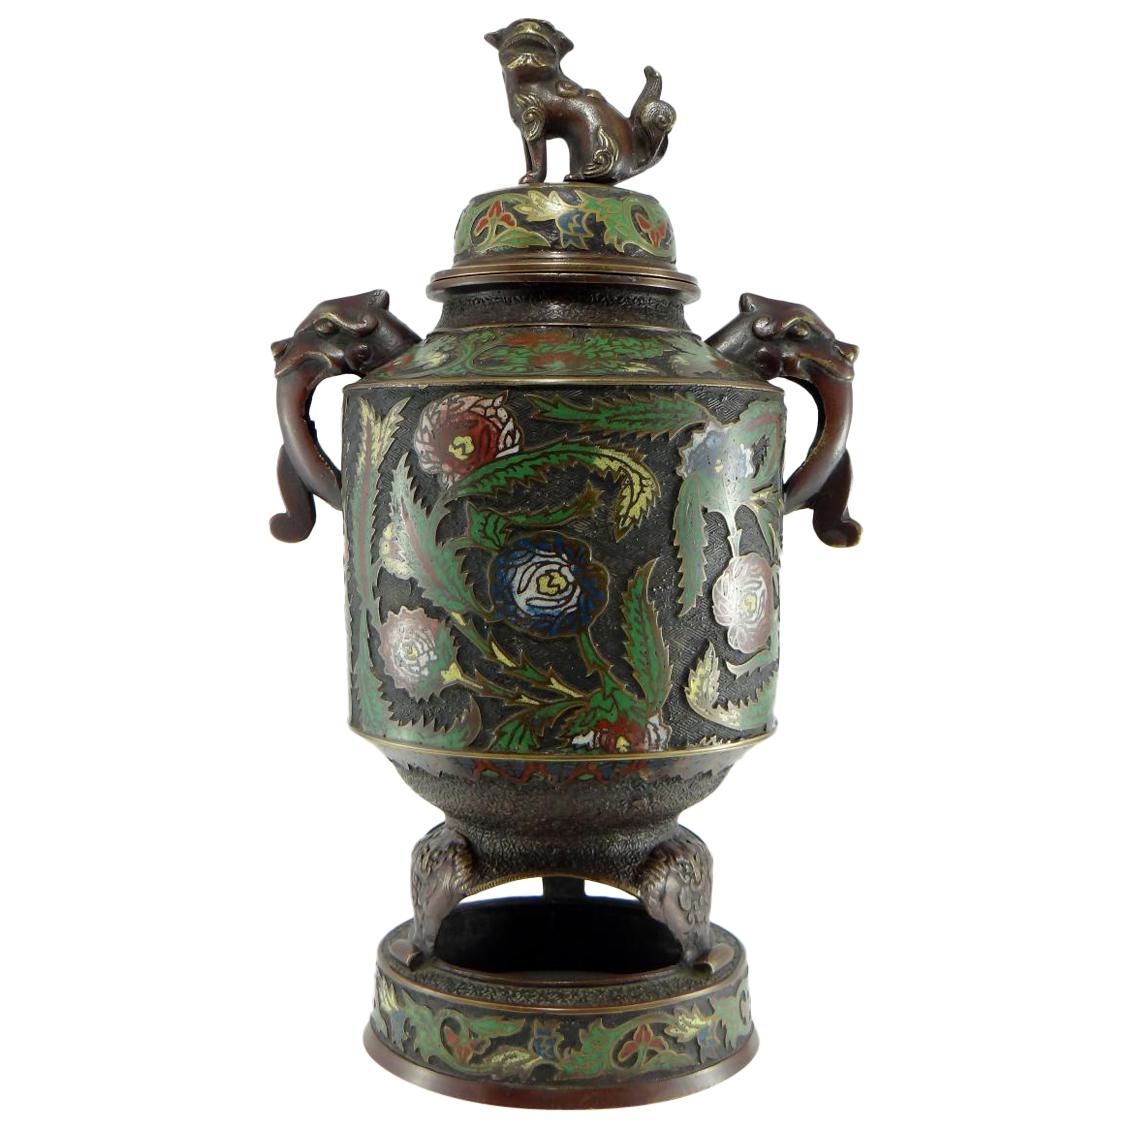 Japan, Late 19th Century, Important Bronze Covered Pot and Cloisonné